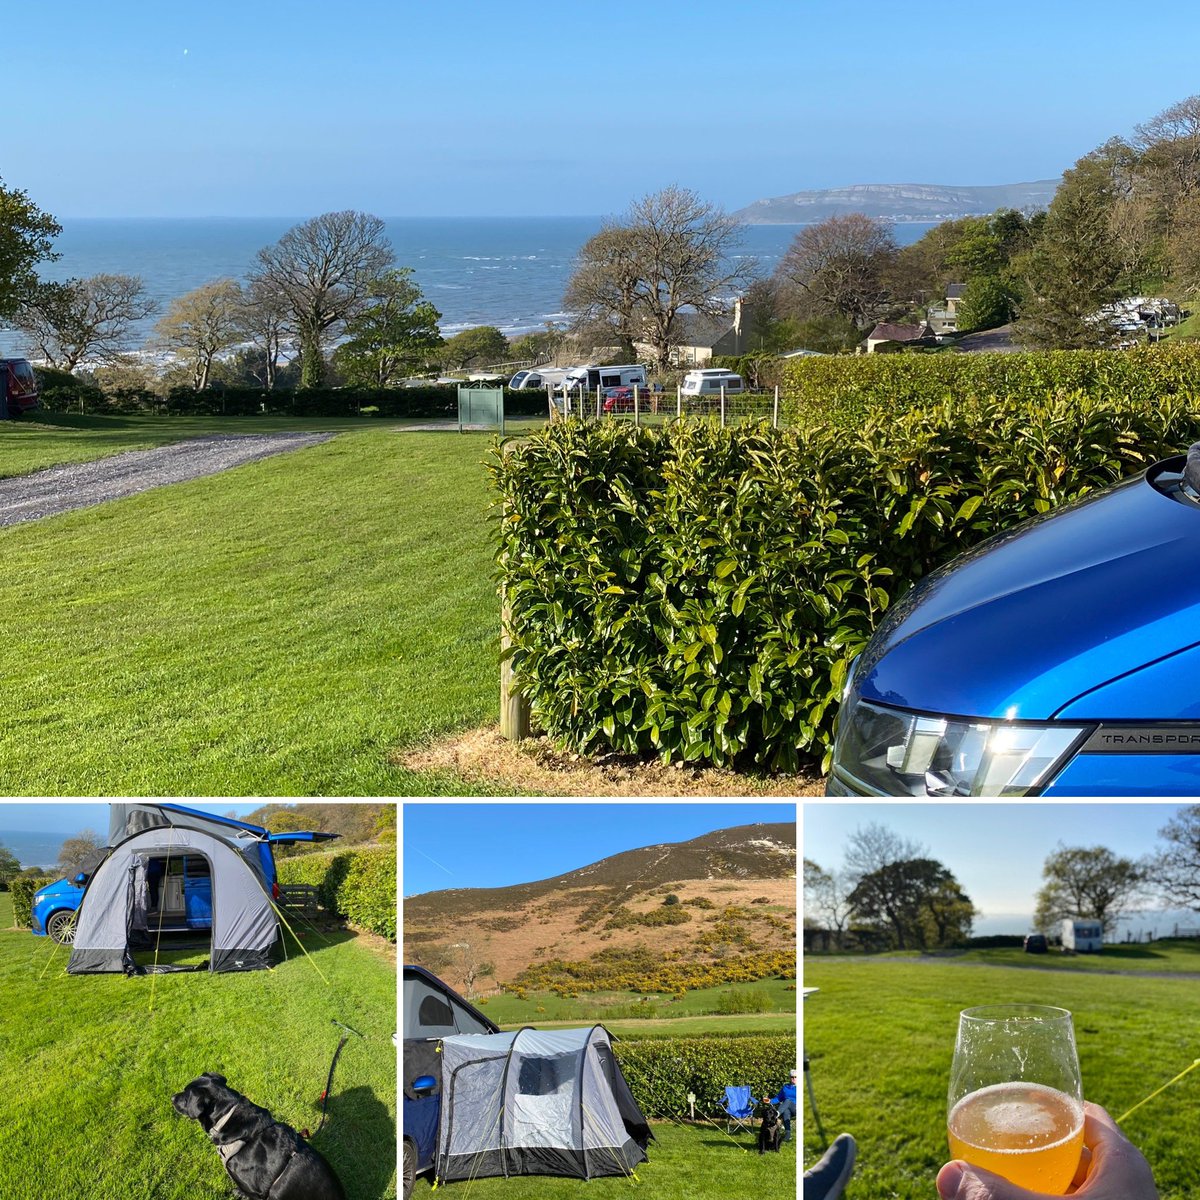 Van life season has officially begun. Cracking campsite just outside Penmaenmawr, with lovely views towards Orm’s Head one way, Ynys Mon (Anglesey) the other, and the foothills of Eryri (Snowdonia) behind us…